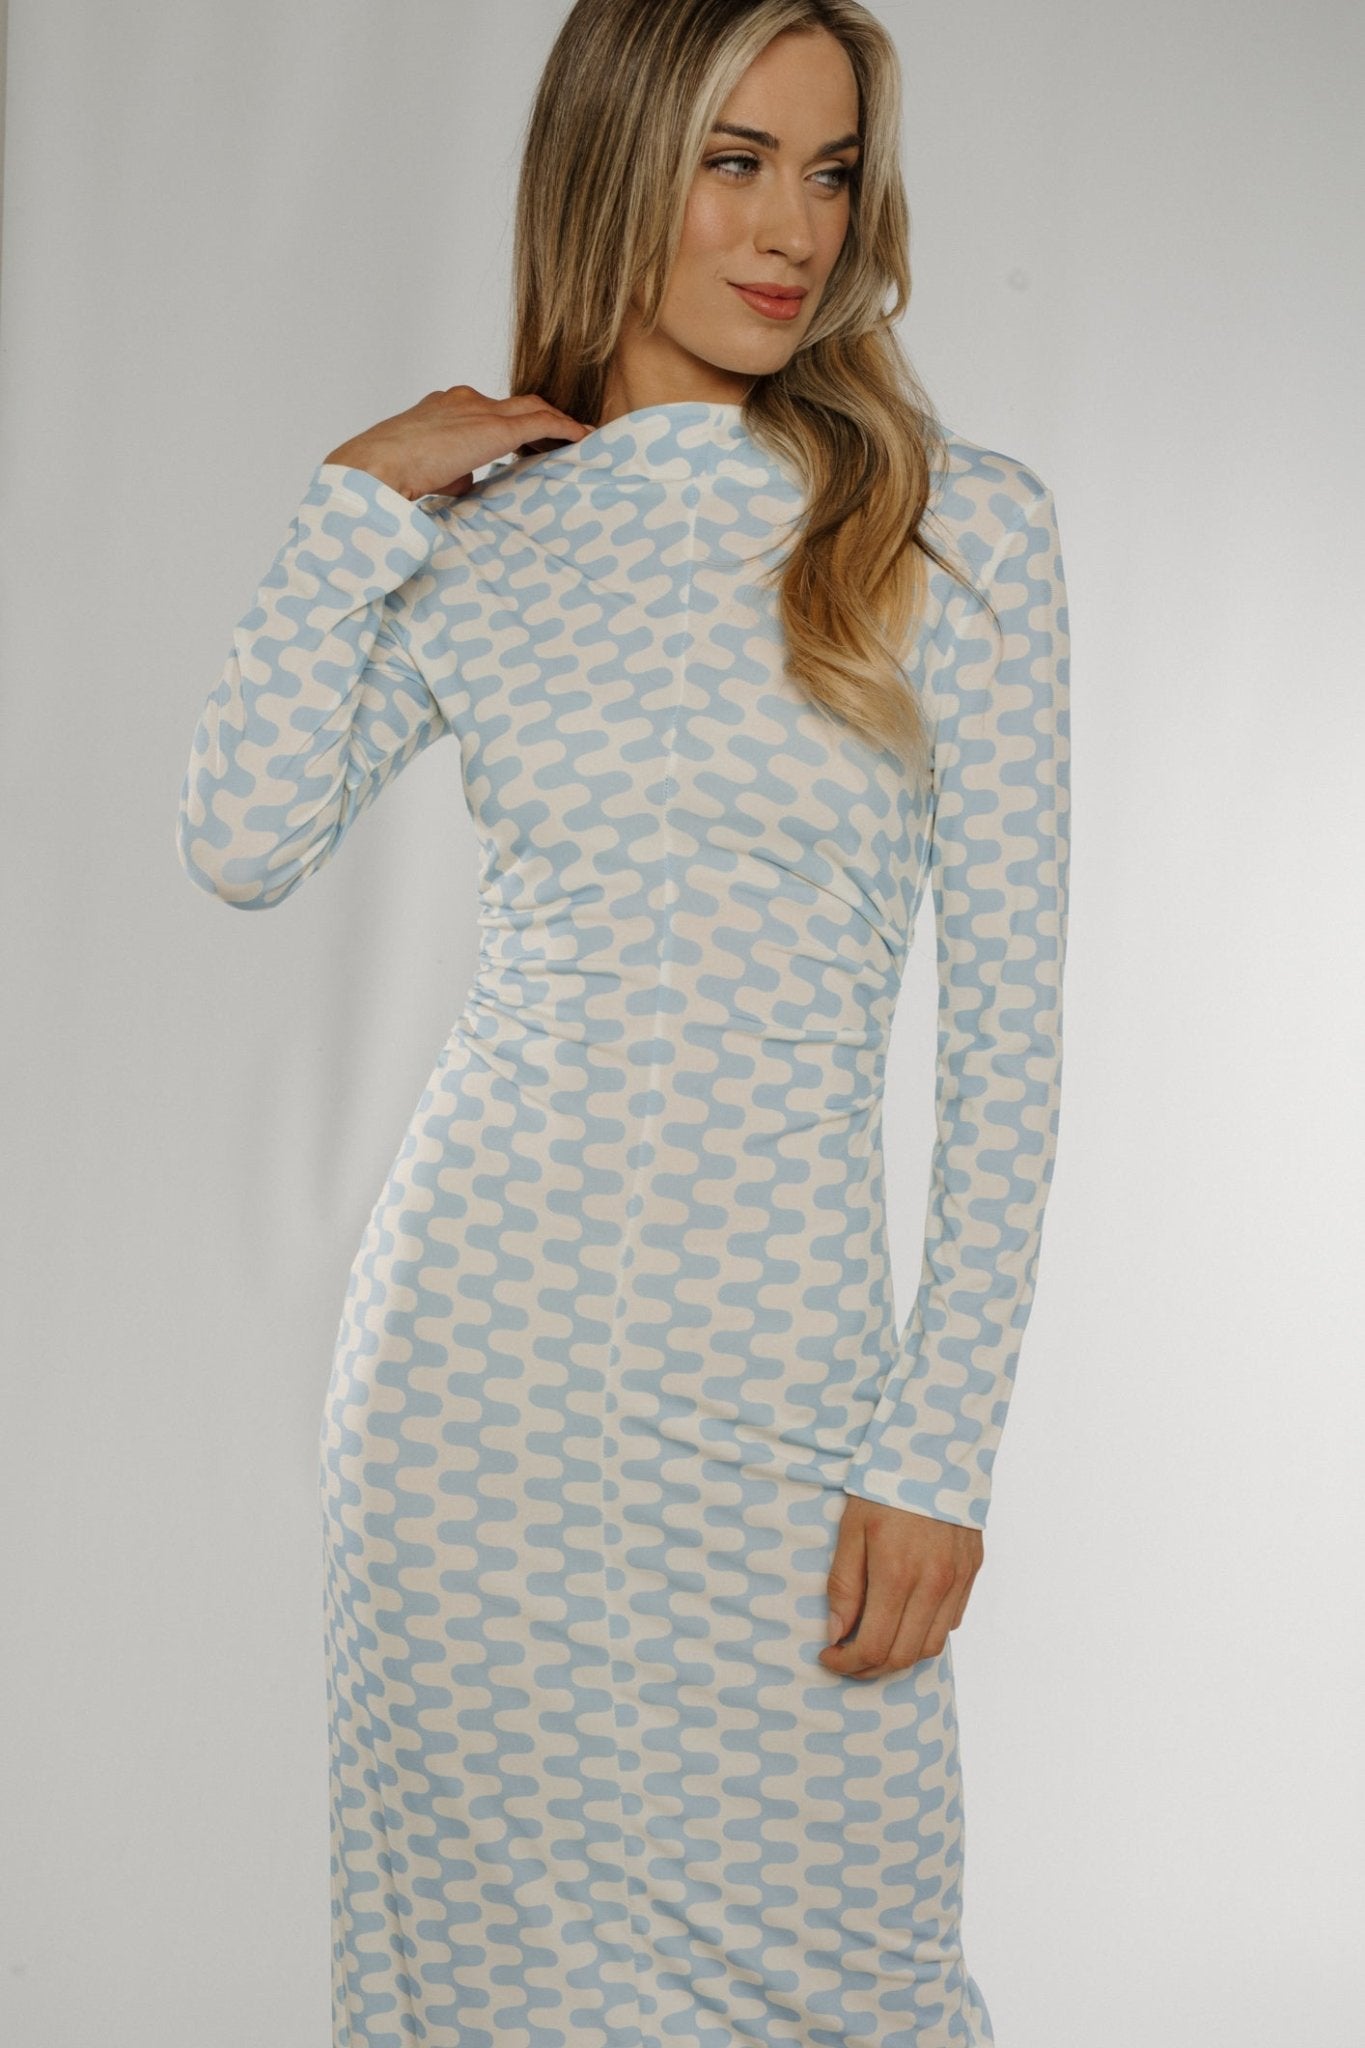 Lexi High Neck Printed Dress In Blue & White - The Walk in Wardrobe